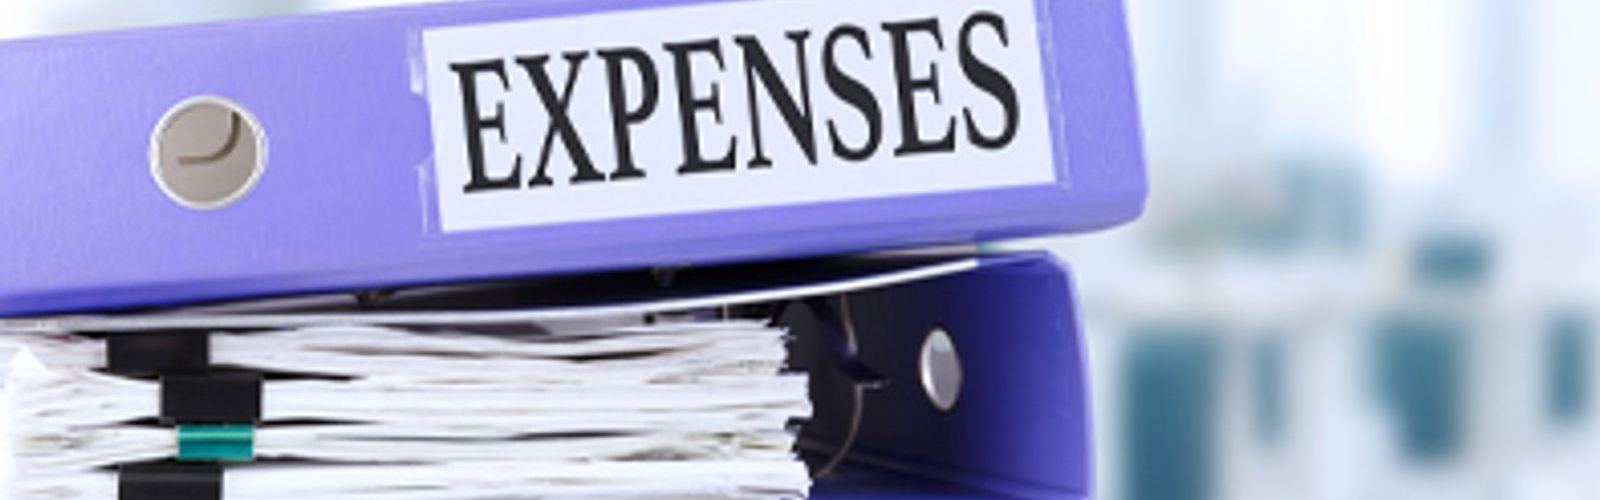 expenses and benefits policy webcat - may 2022.jpg